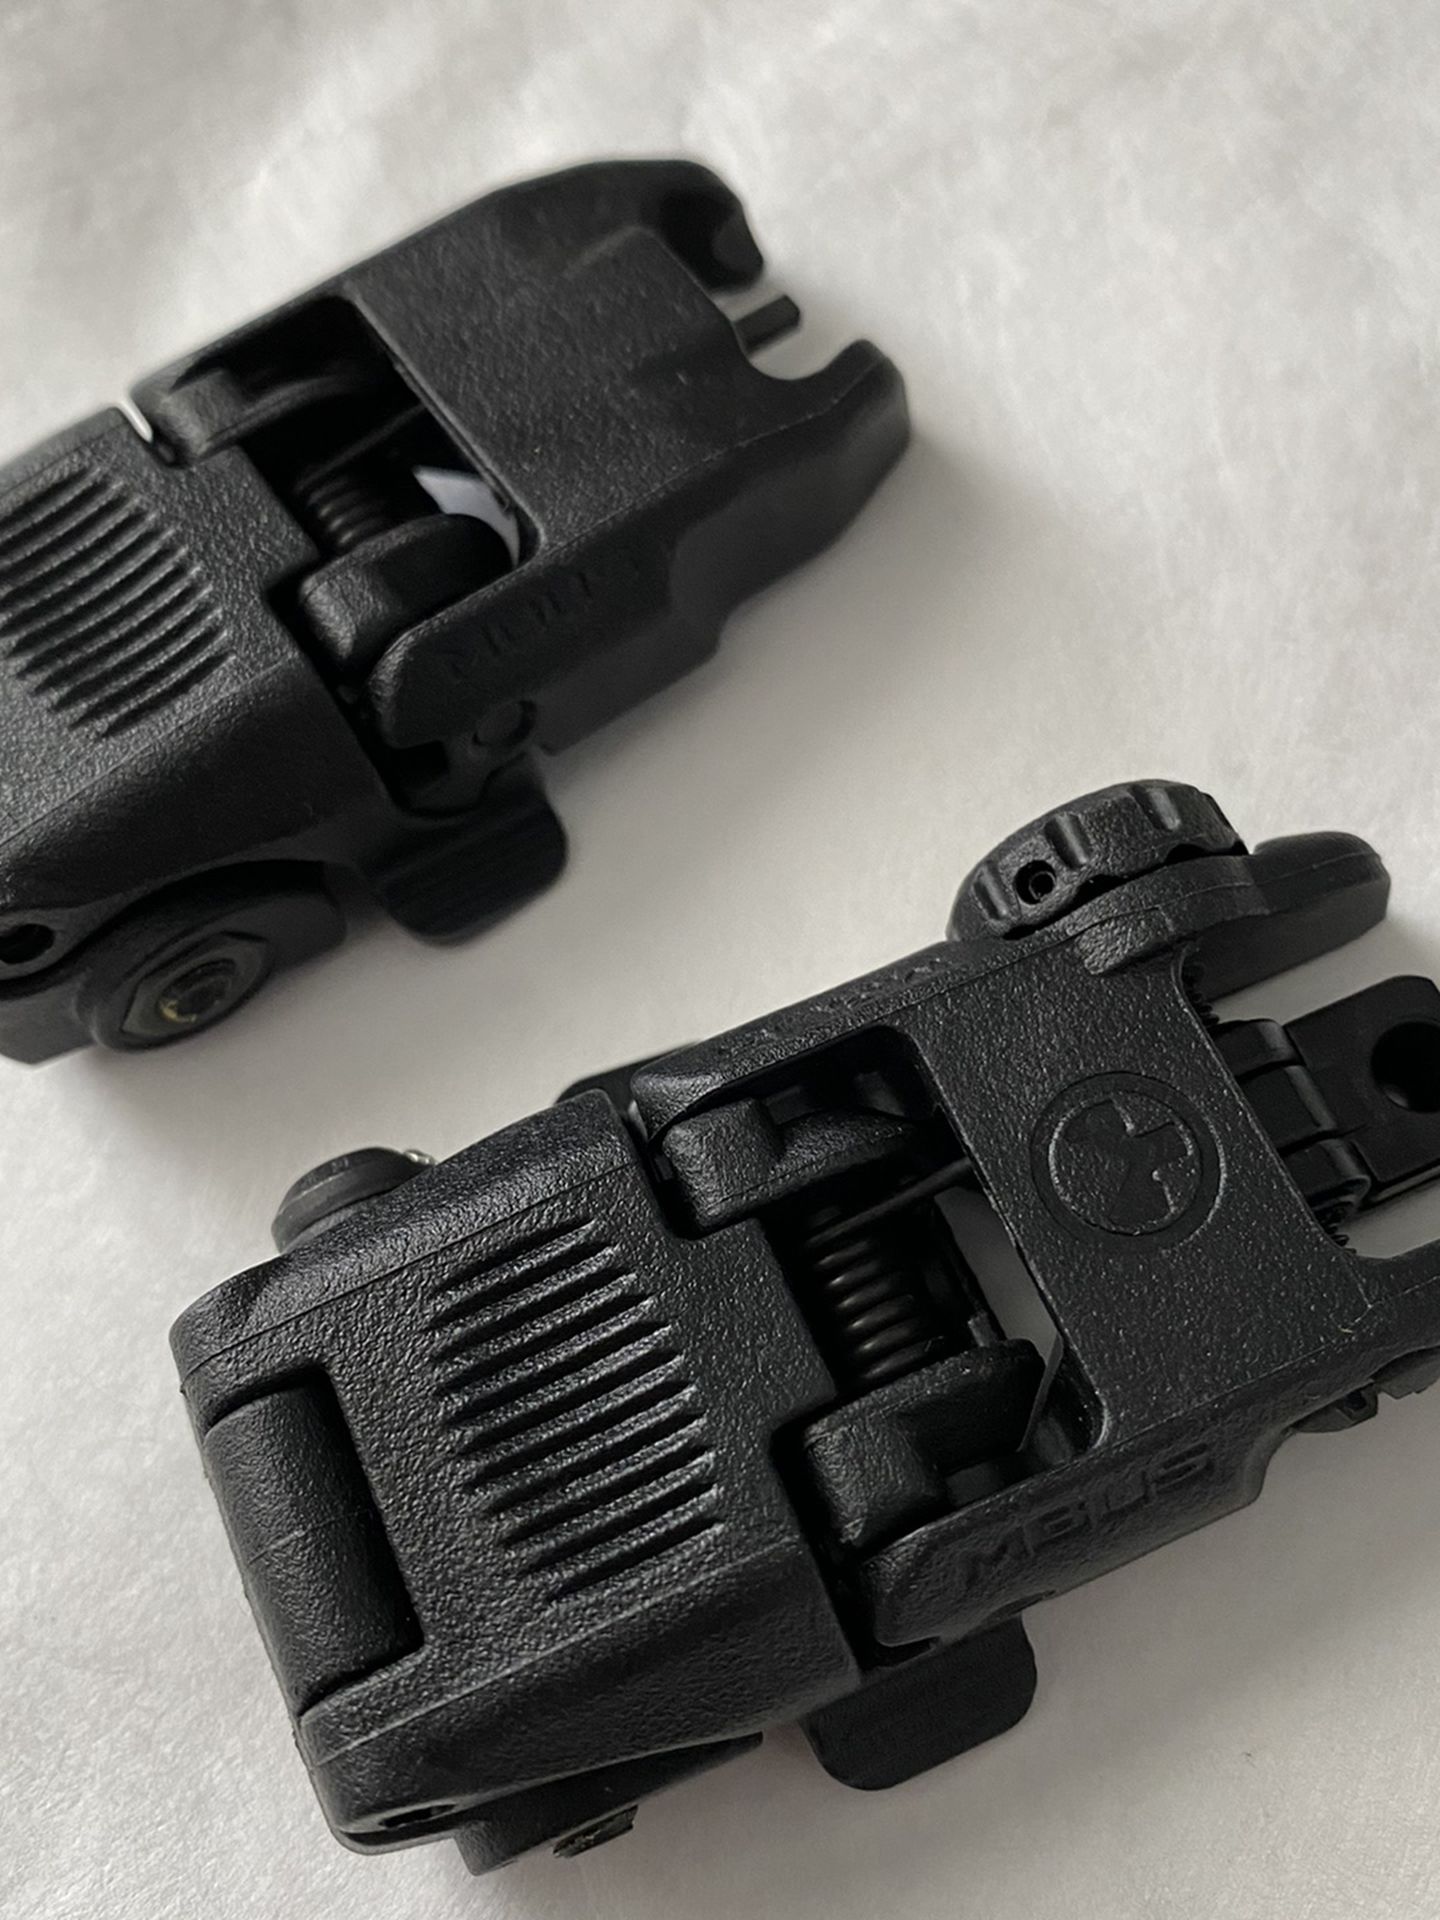 Mbus Rear And Front Sight